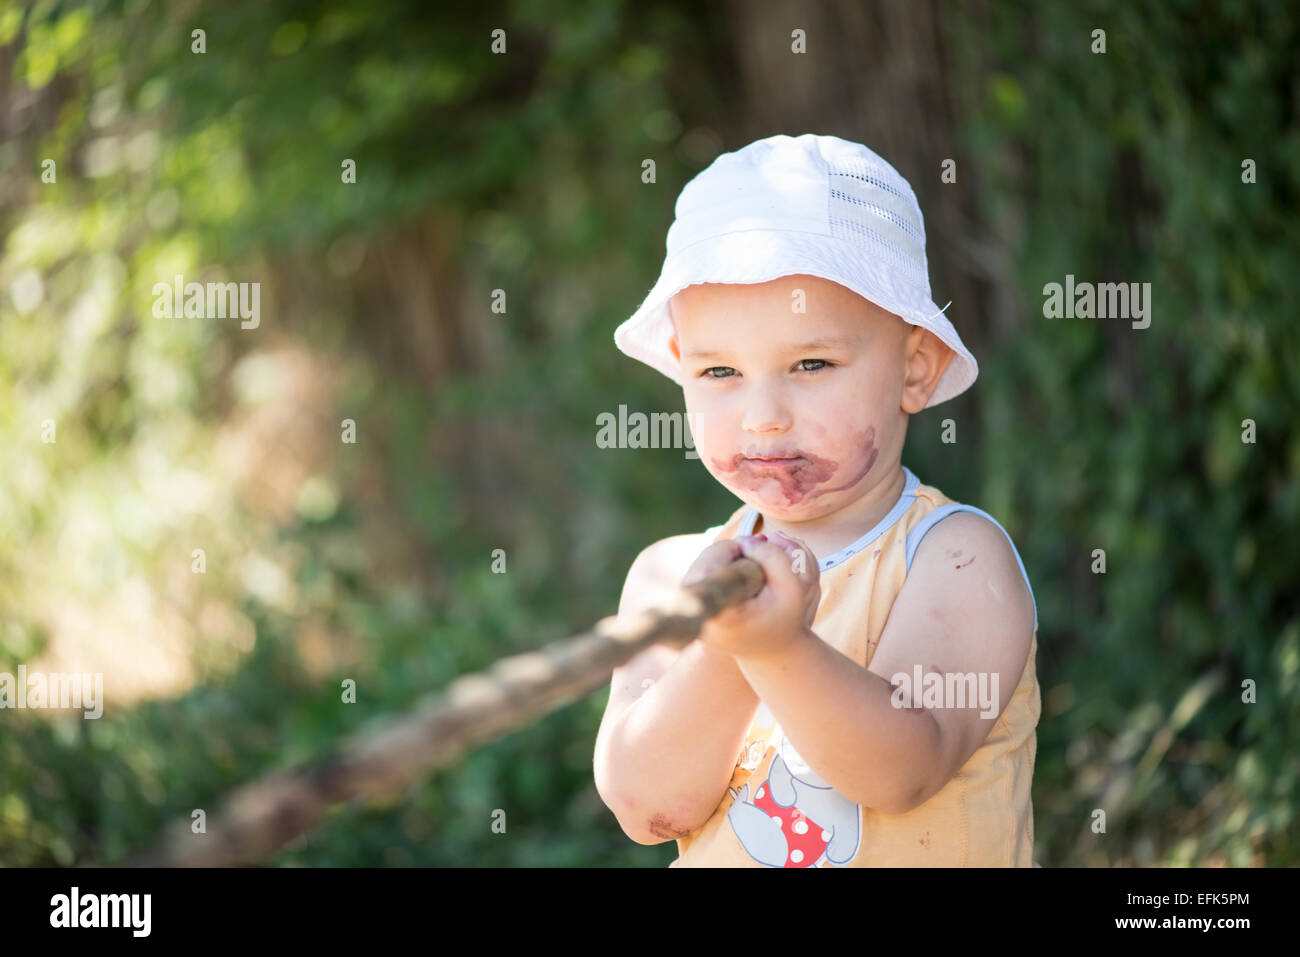 Child dirty mouth by mulberries with a stick in hand Stock Photo